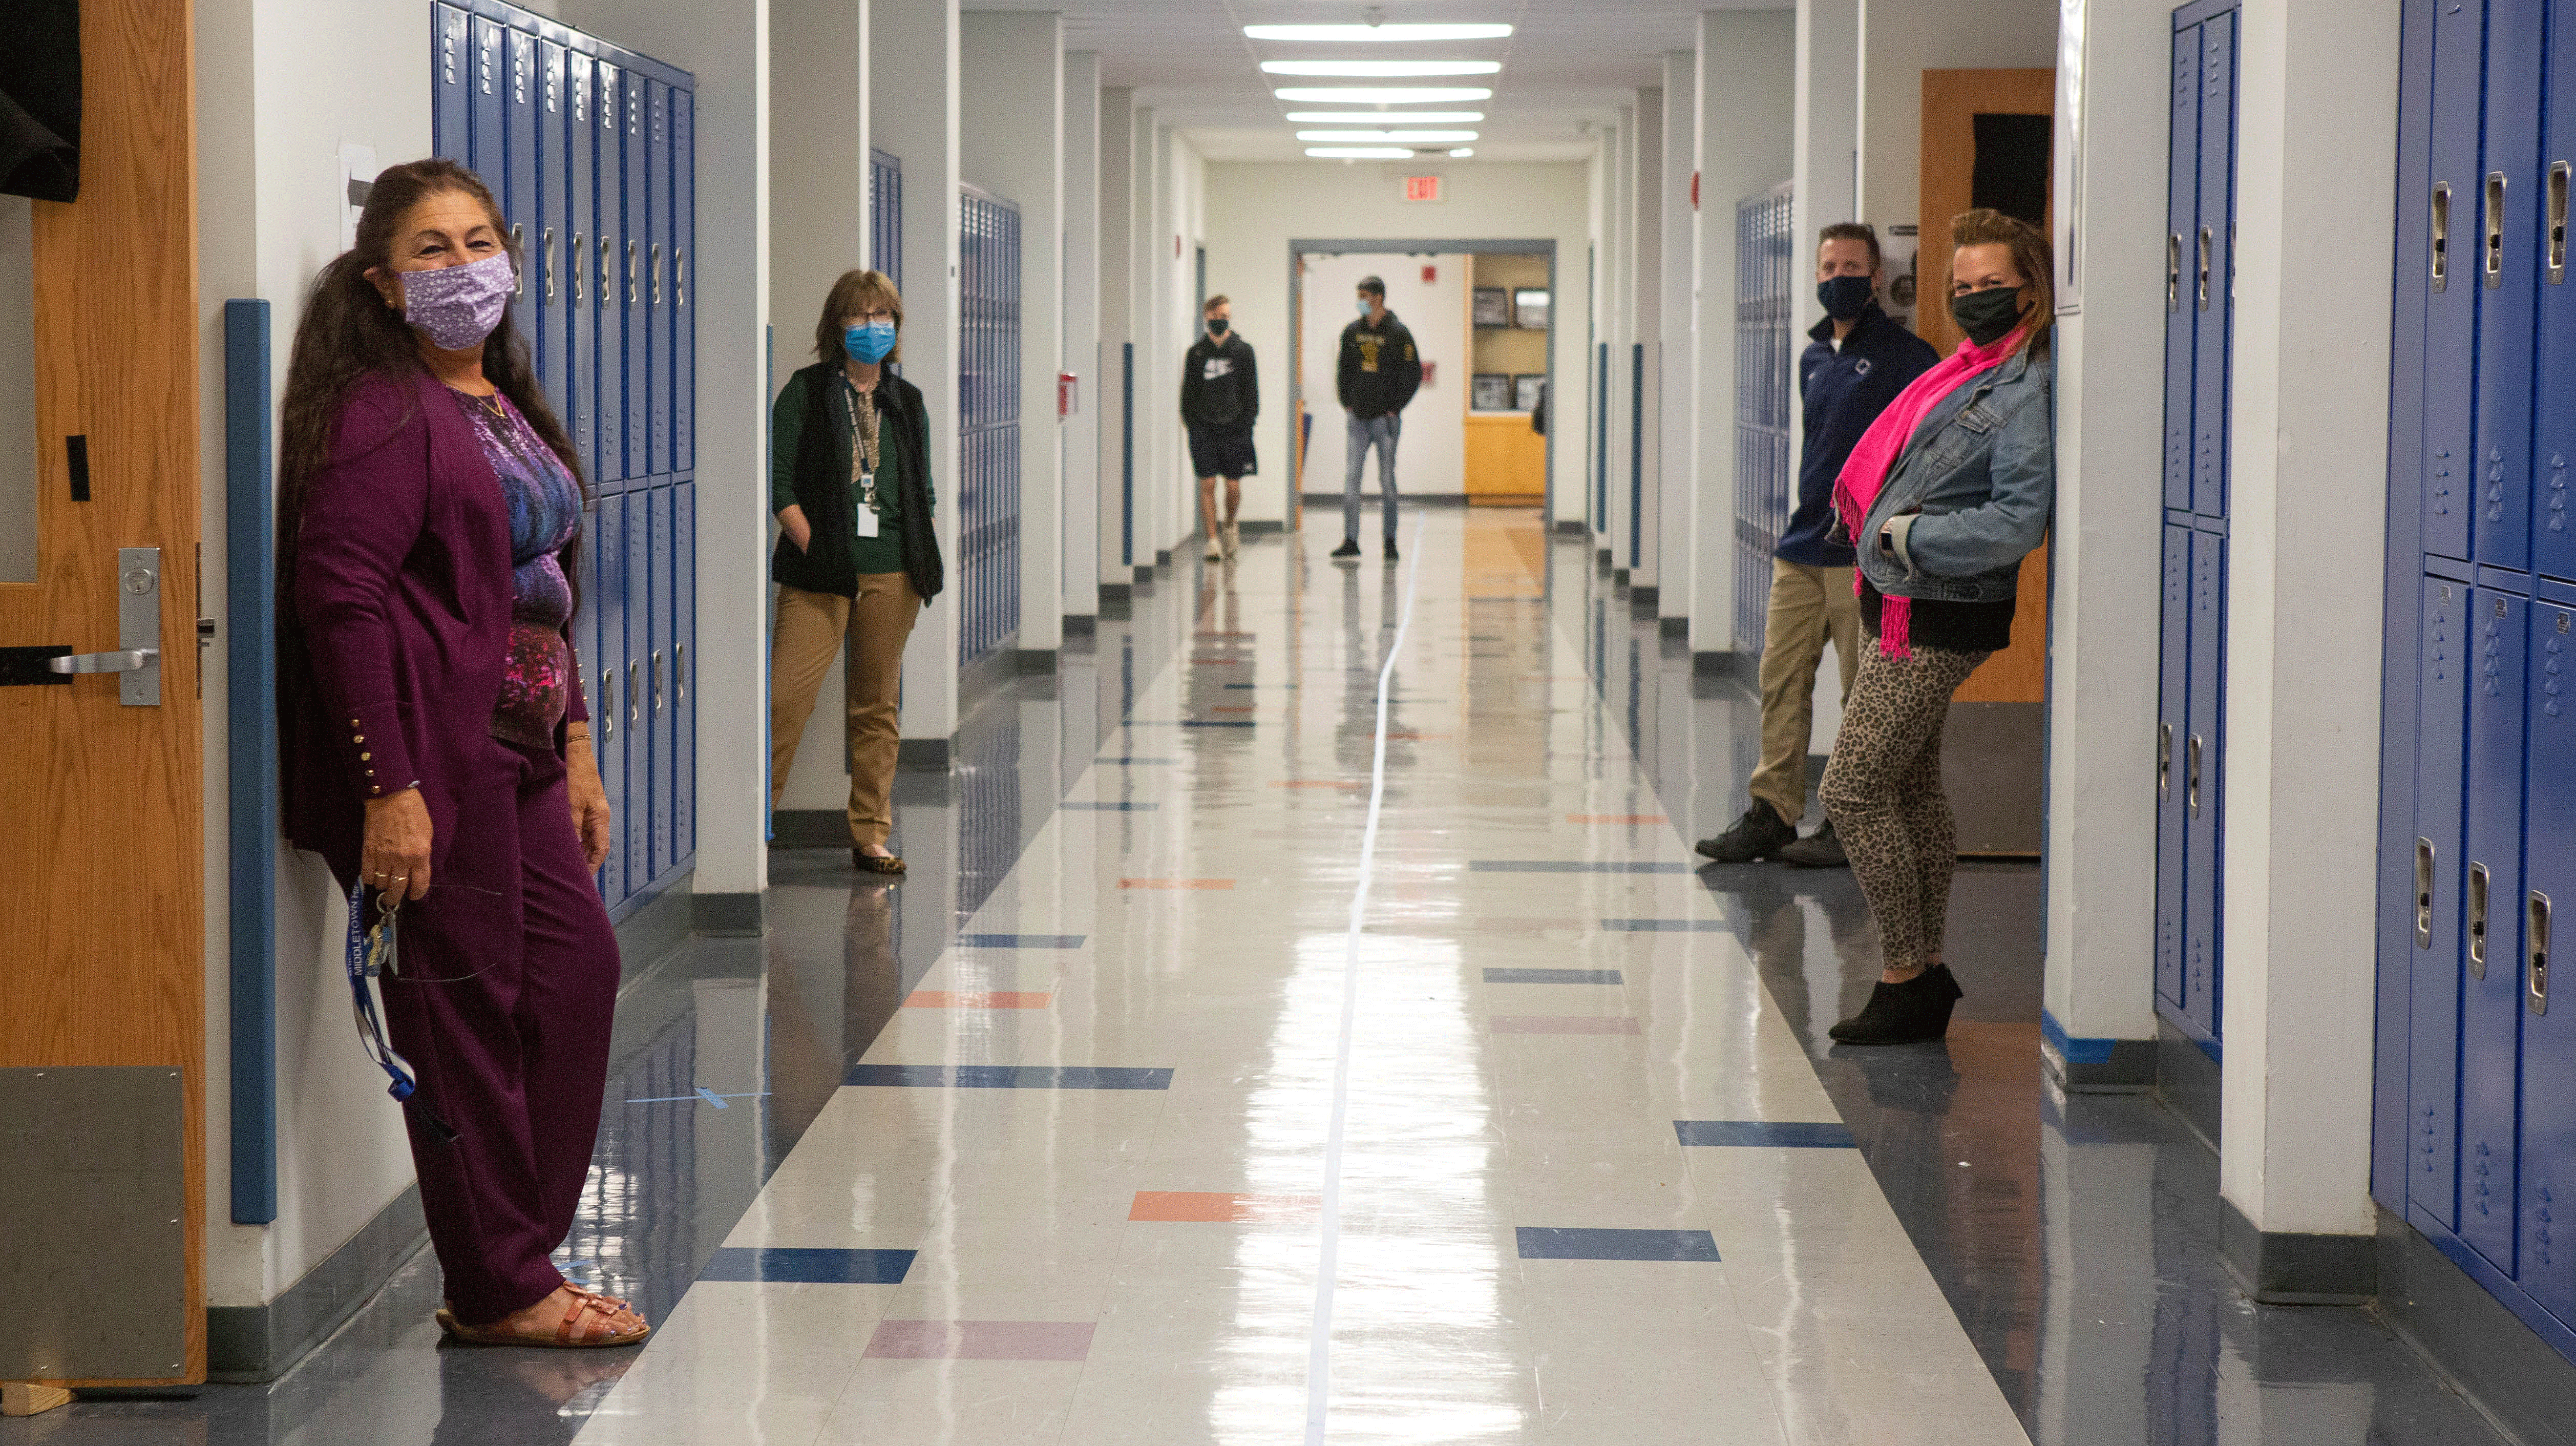 Teachers in a school hallway during the height of the COVID pandemic, wearing masks and socially distanced in a hallway devoid of students